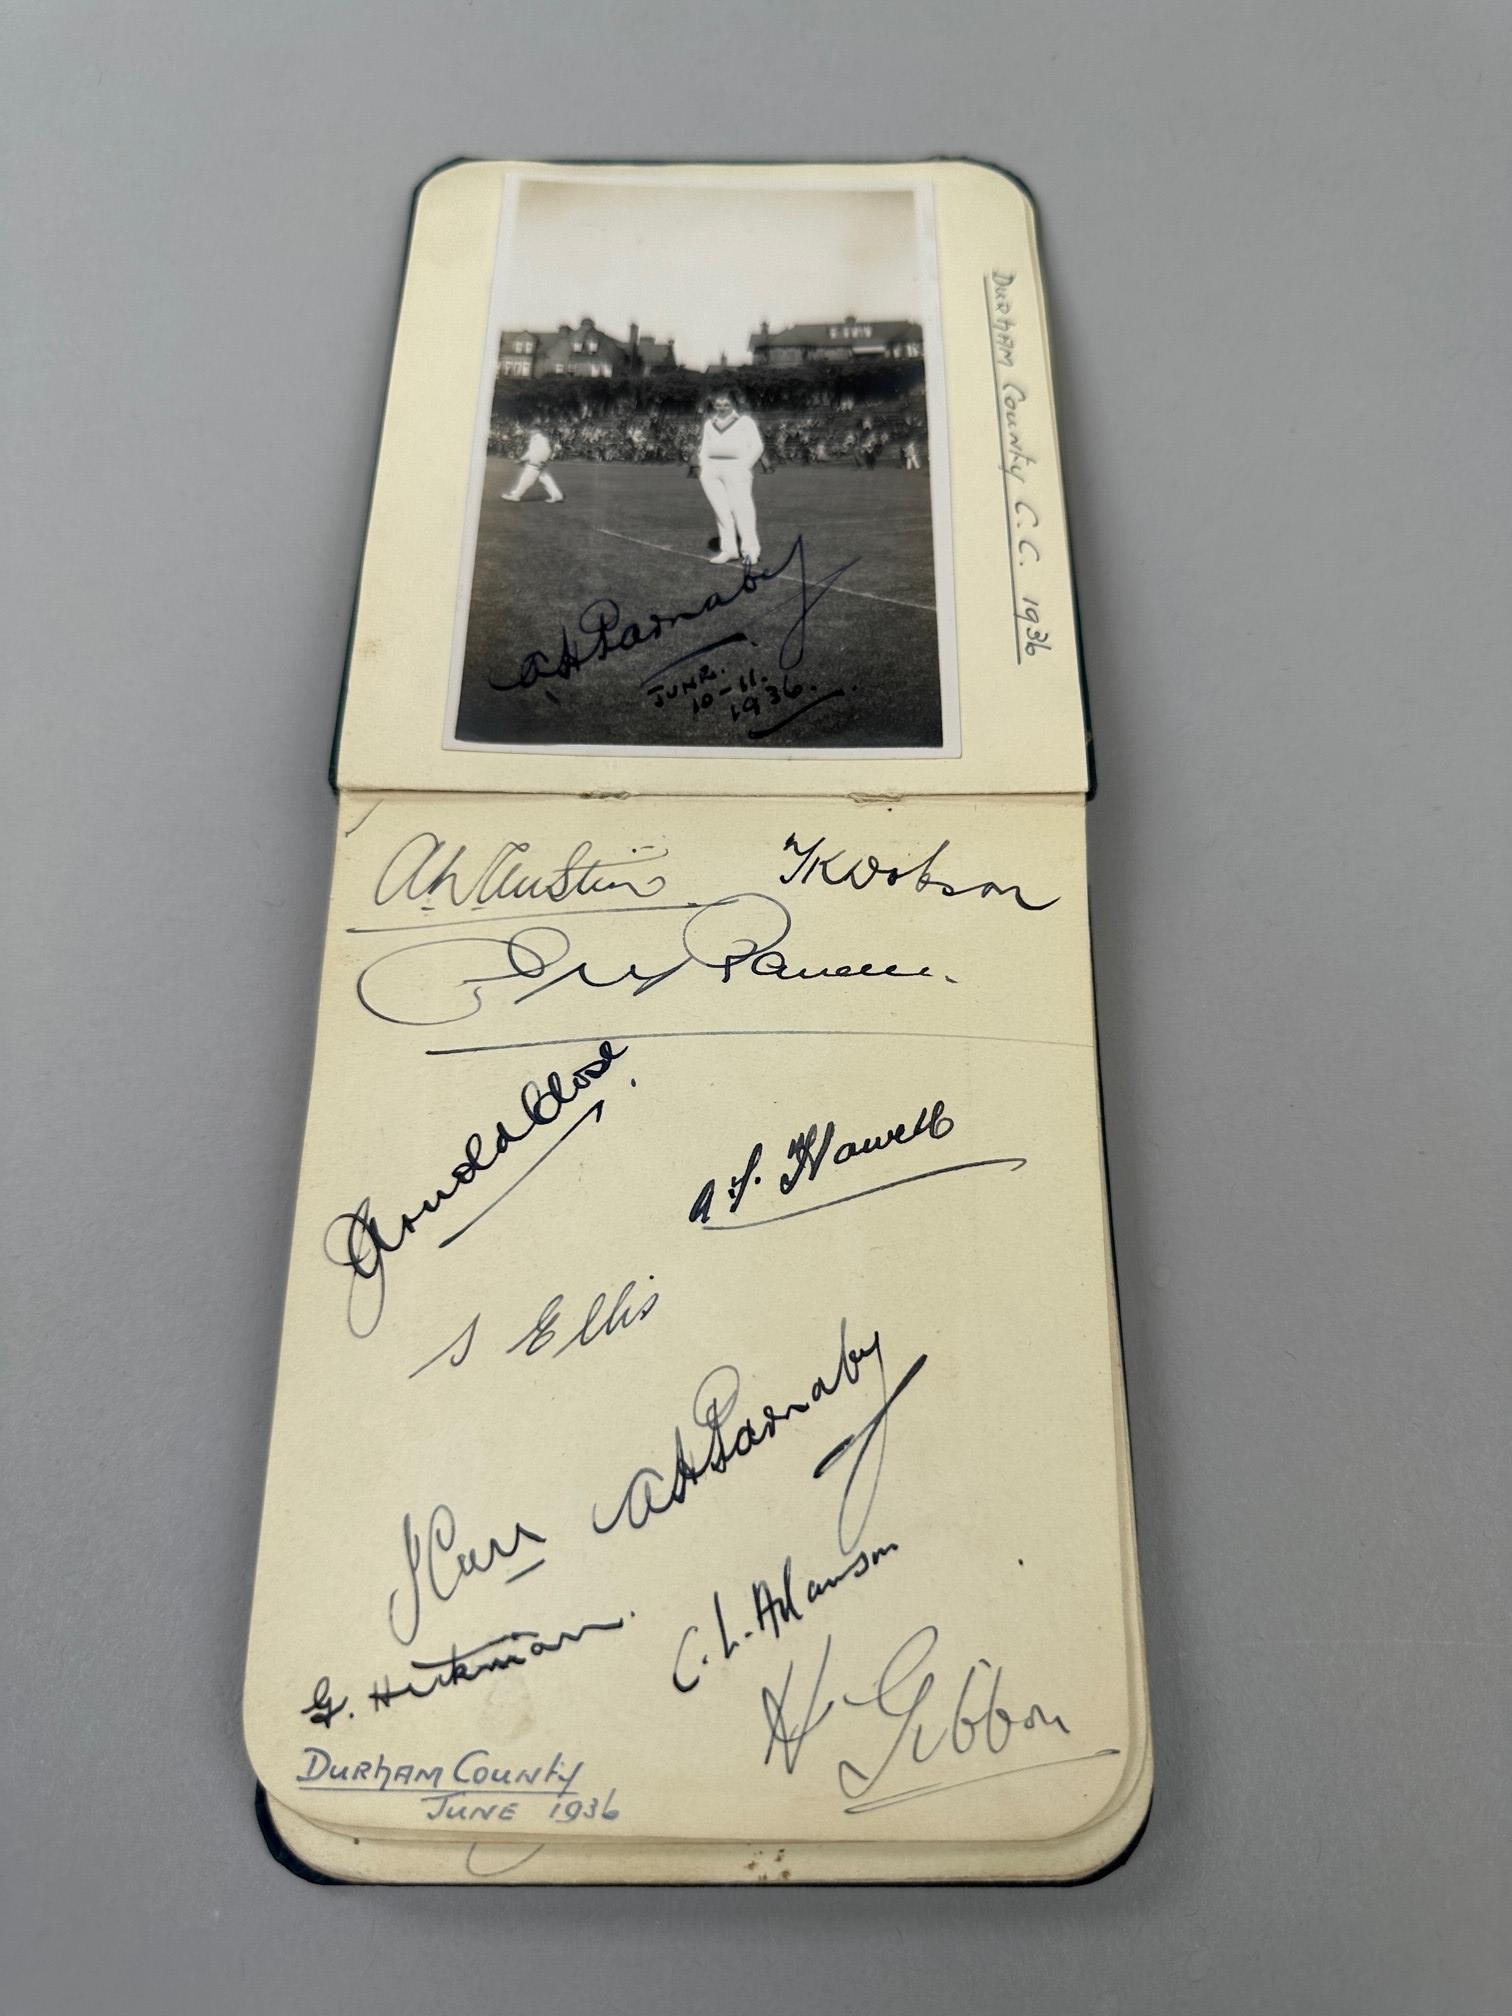 An interesting and extensive autograph album containing team autographs from the 1930s - Image 4 of 19